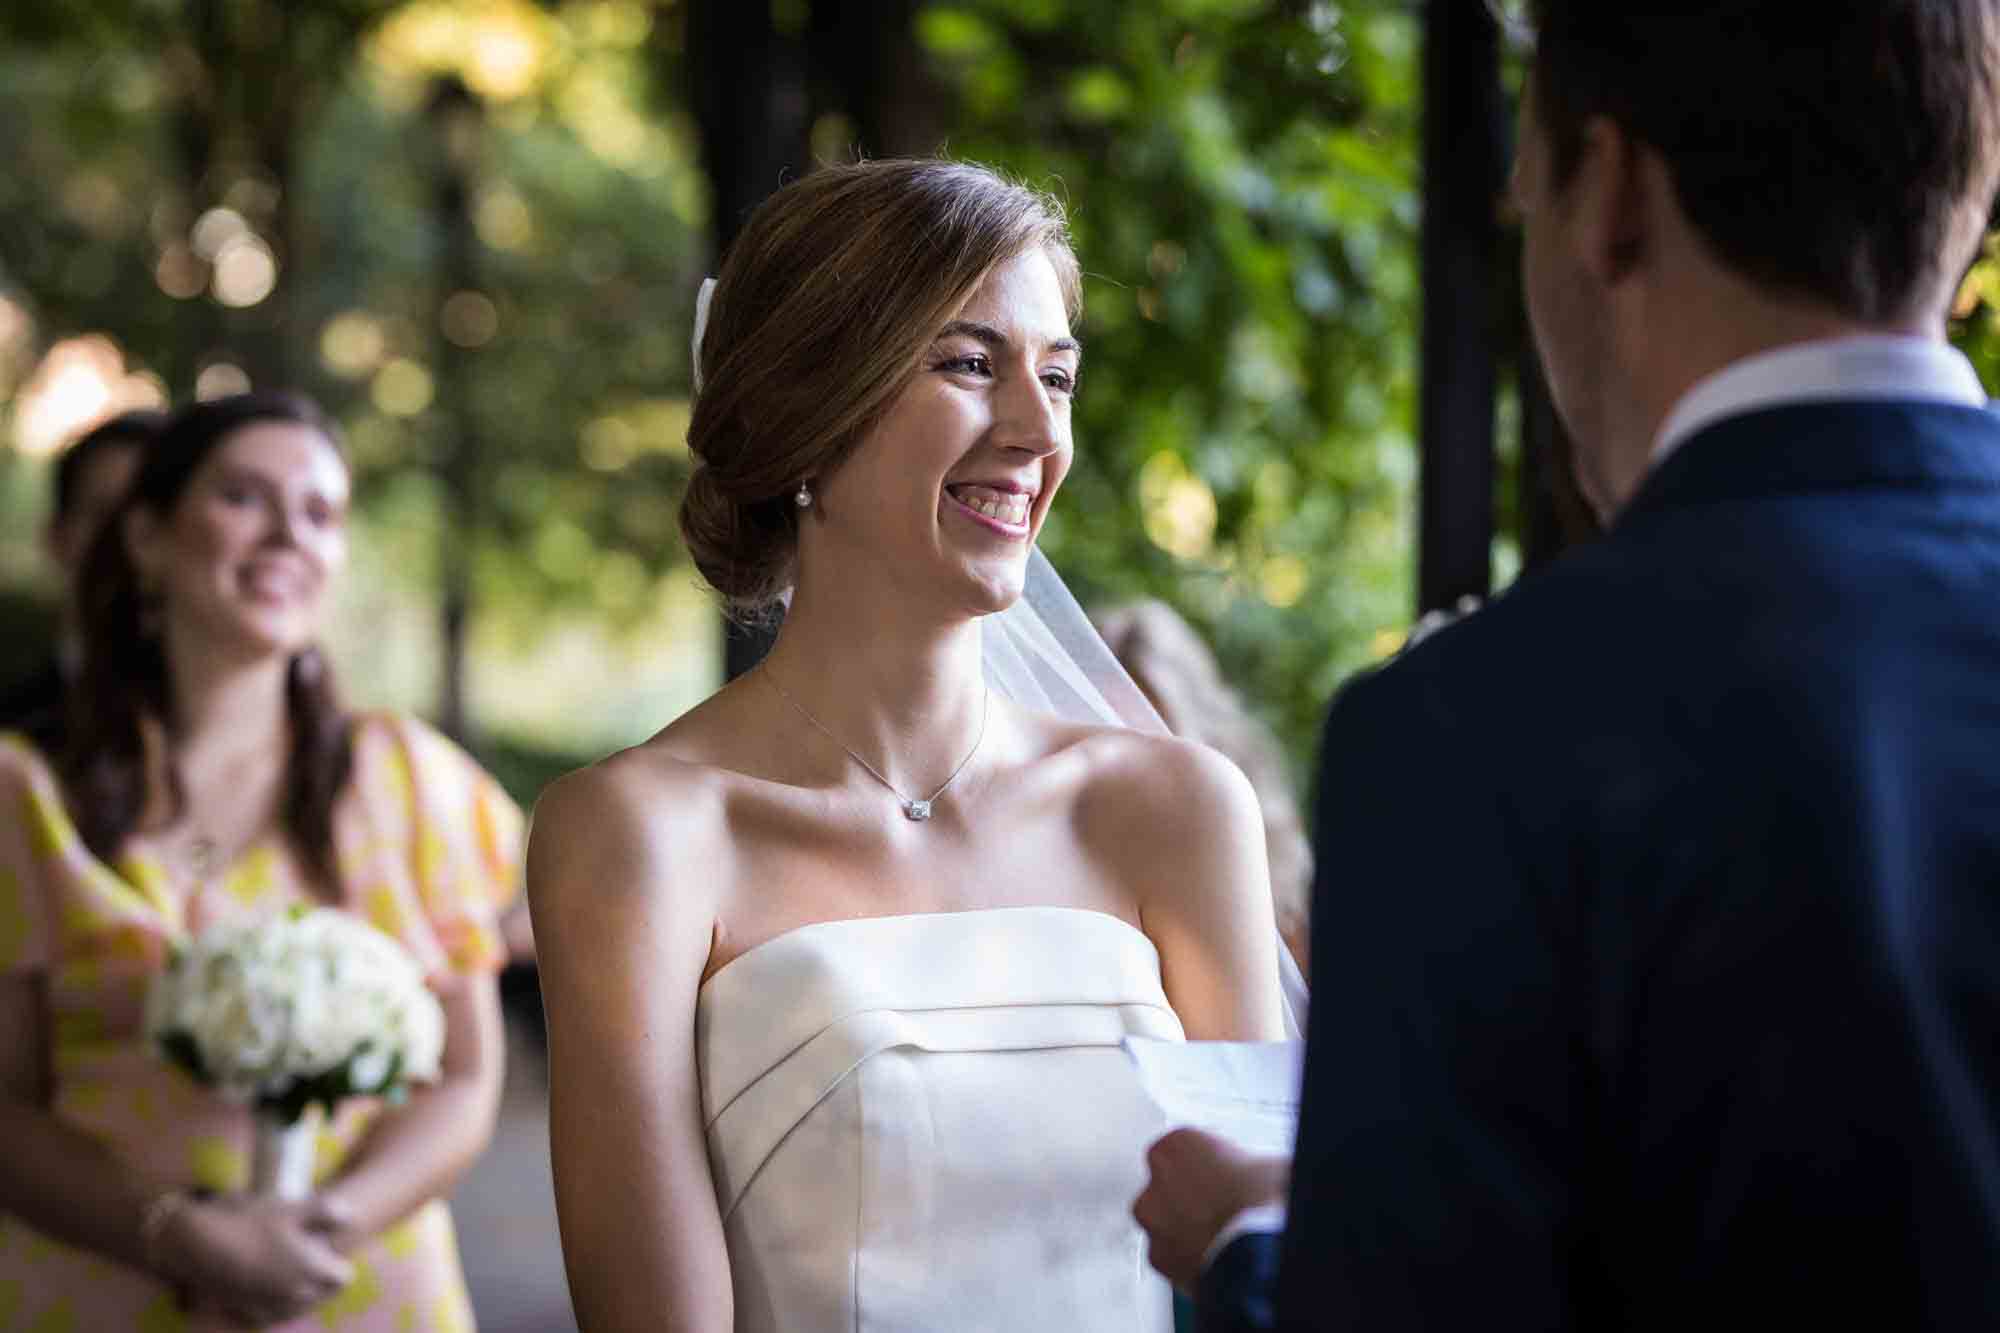 Bride laughing during ceremony during a Conservatory Garden wedding in Central Park